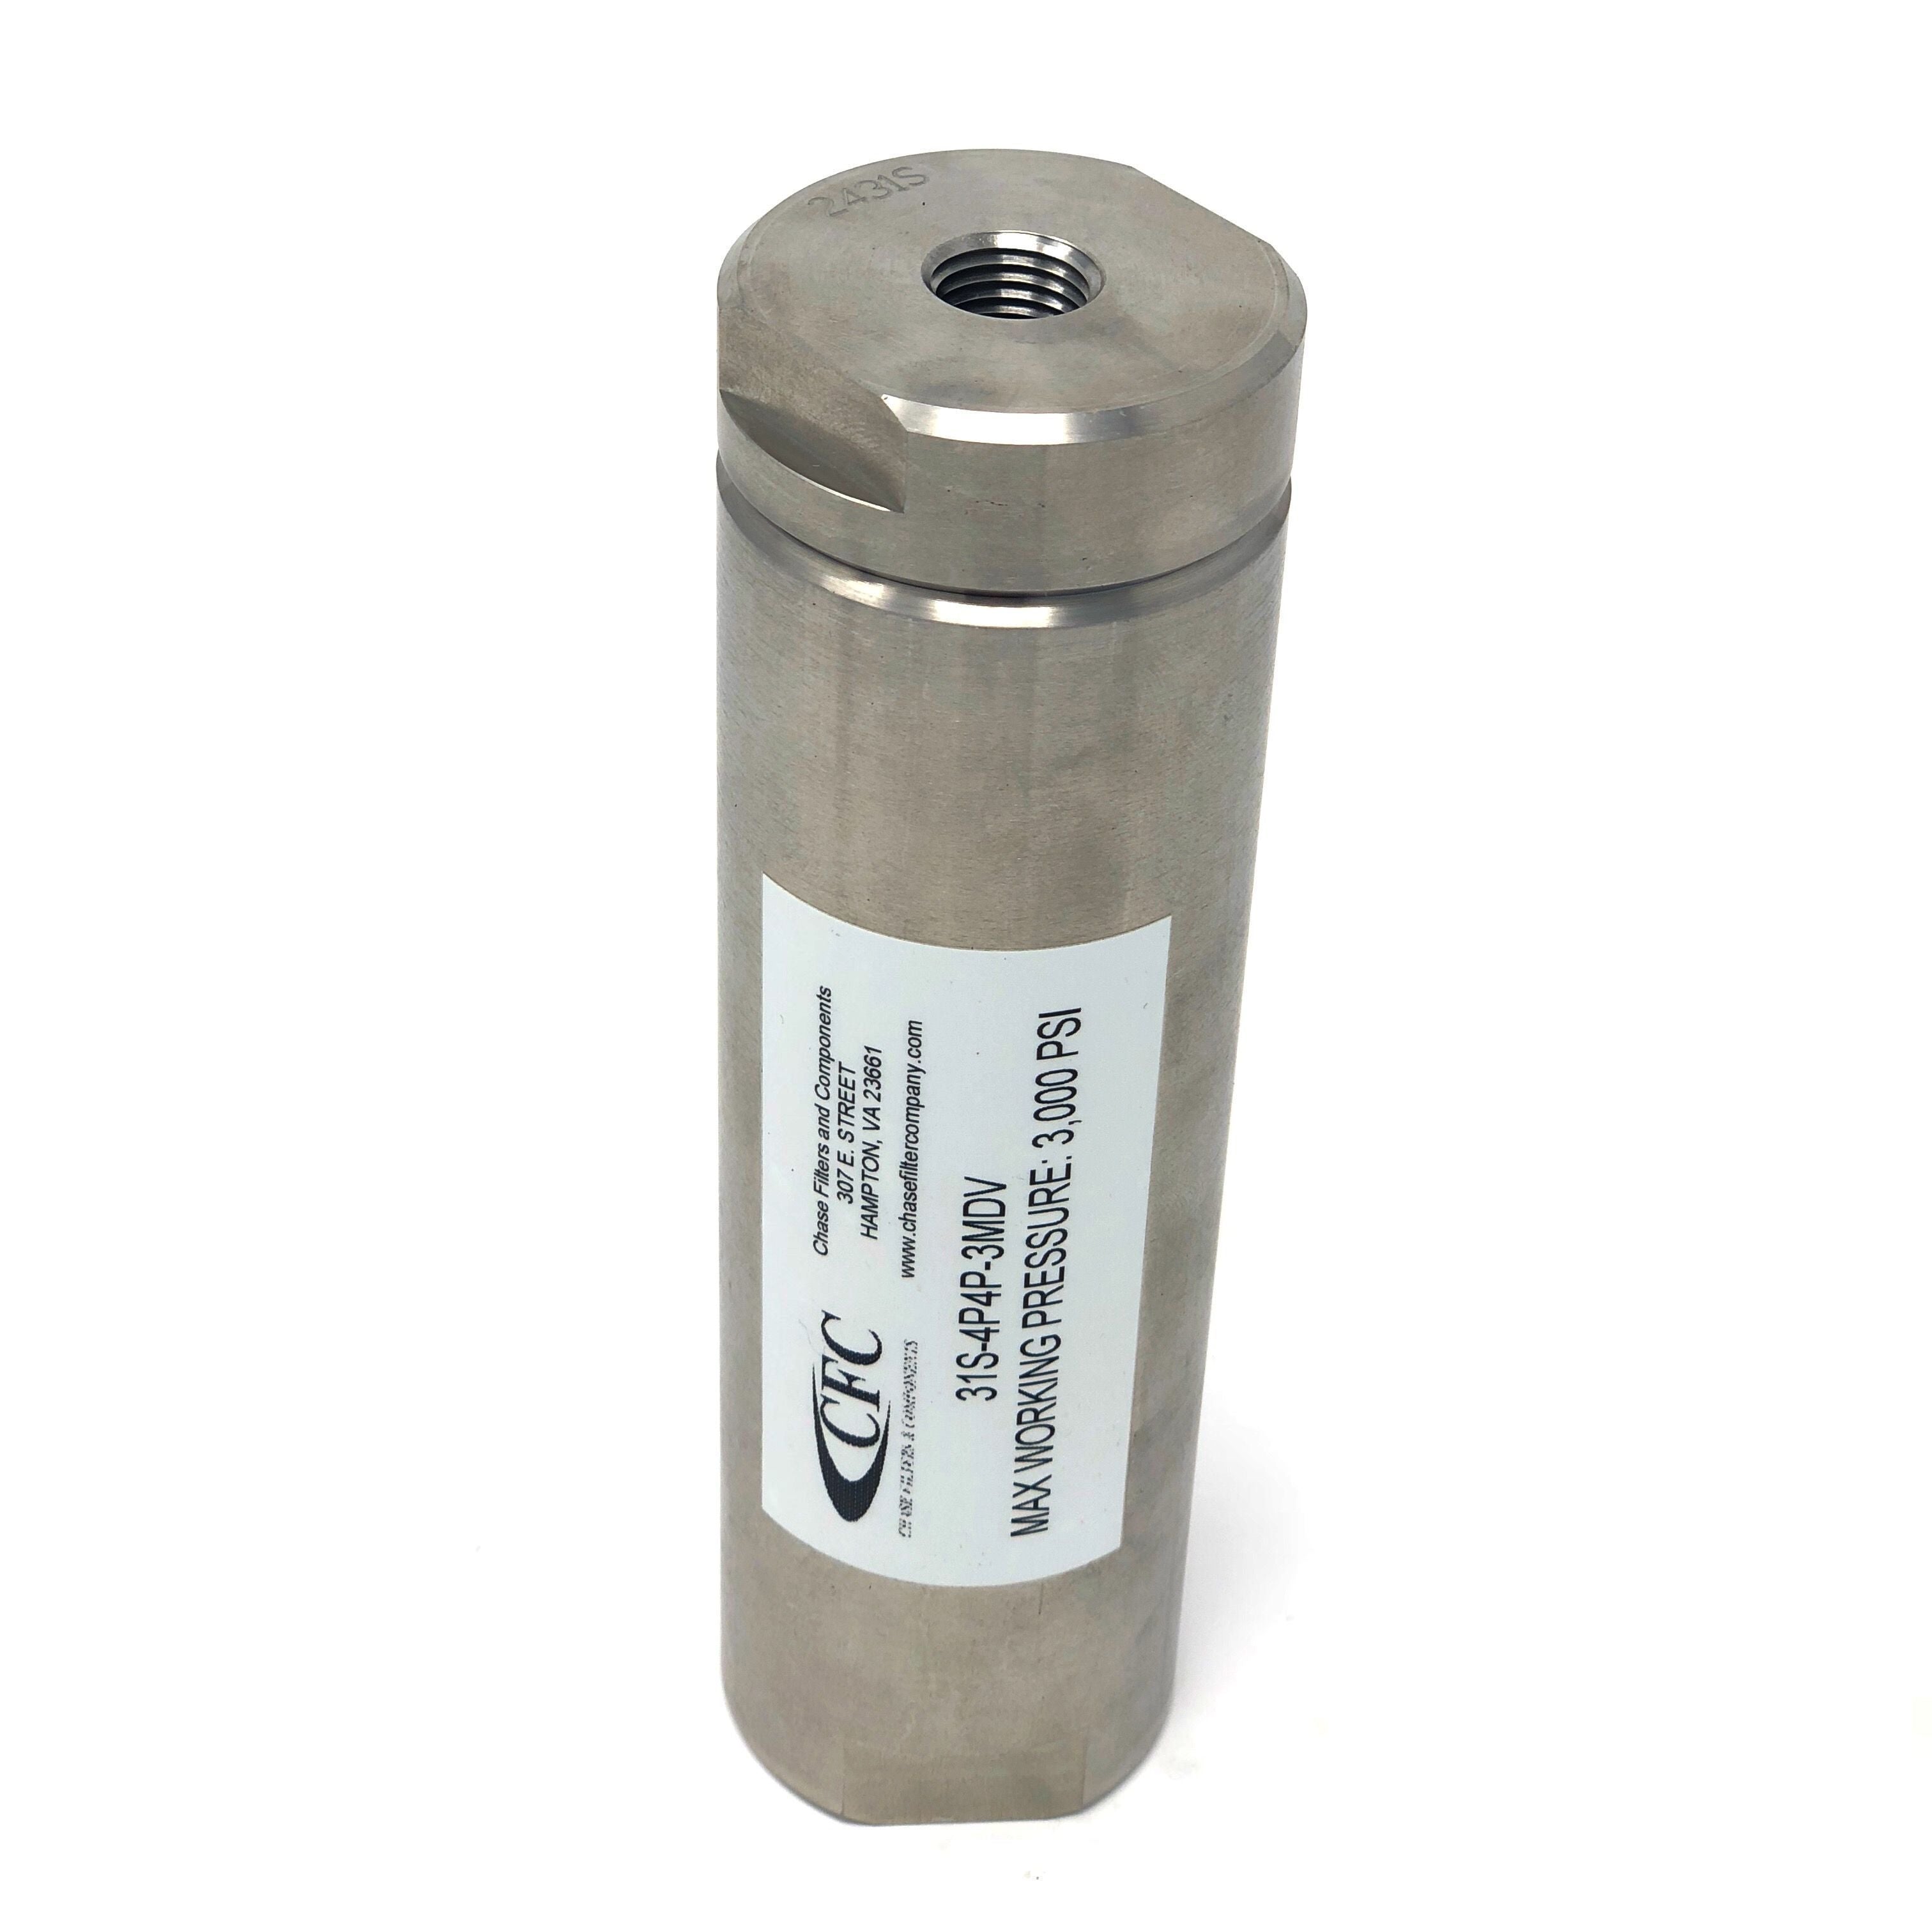 31S-8M8M-3MN : Chase High Pressure Inline Filter, 3000psi, #8 SAE (1/2"), 3 Micron, No Visual Indicator, No Bypass